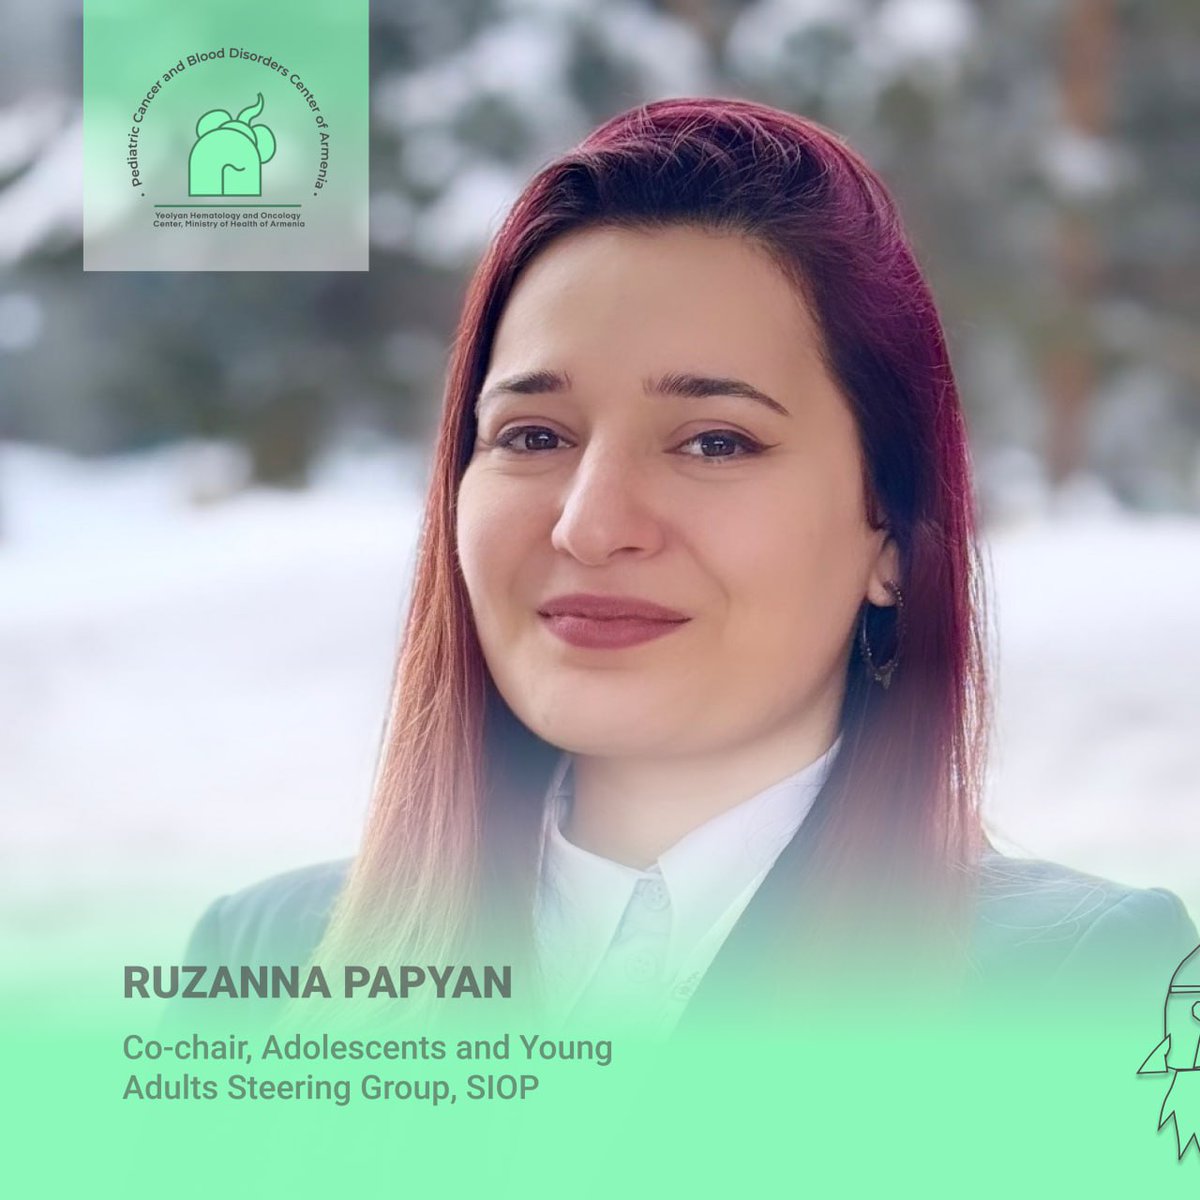 We proudly announce that Ruzanna Papyan, a #pediatric #oncologist at the Pediatric Cancer and Blood Disorders Center of Armenia, has become the co-chair of the Adolescents and Young Adults Steering Group of the International Society of Pediatric Oncology - SIOP. @WorldSIOP